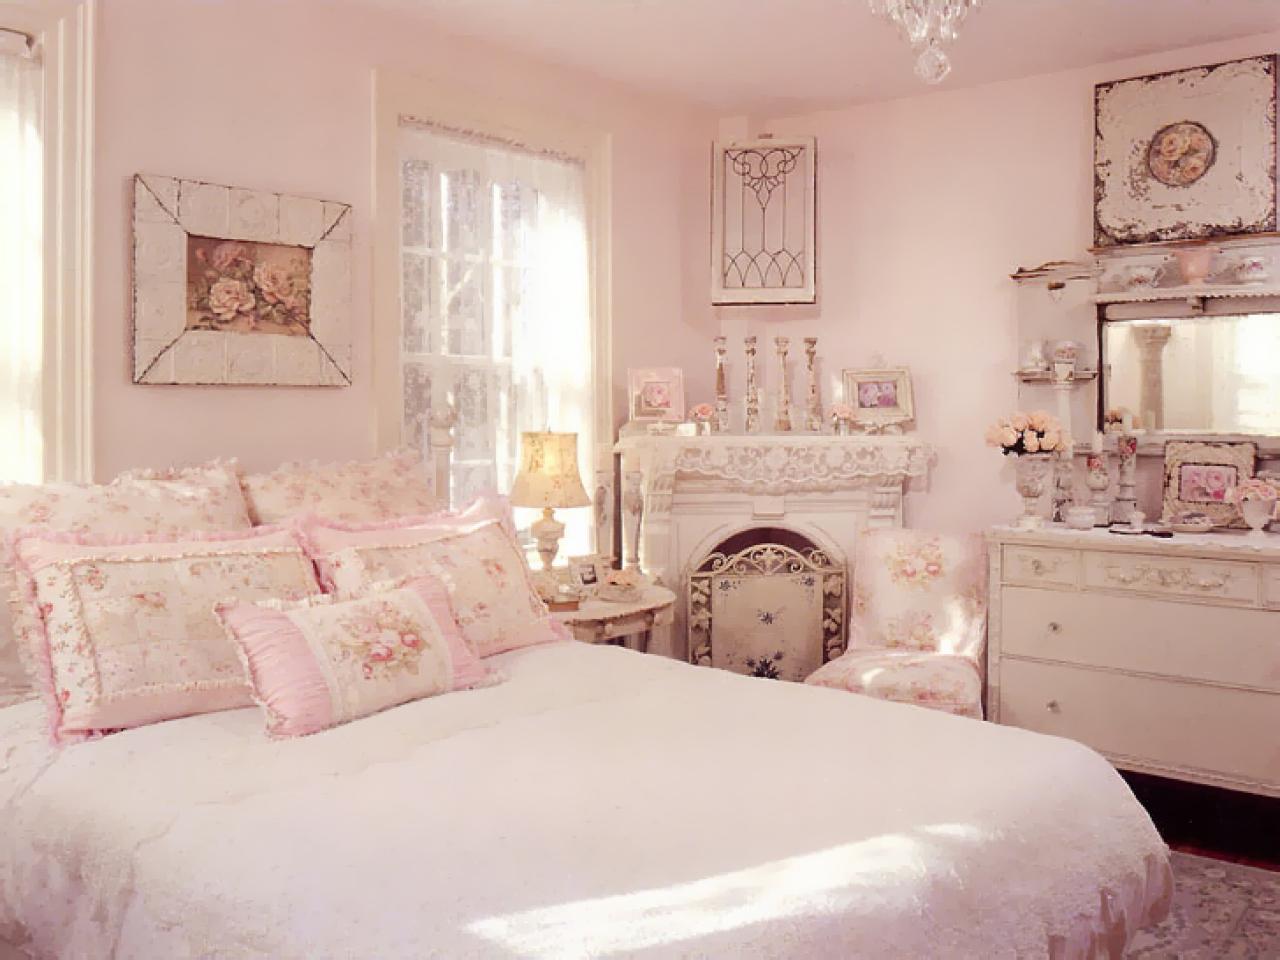 Shabby Chic Bedrooms